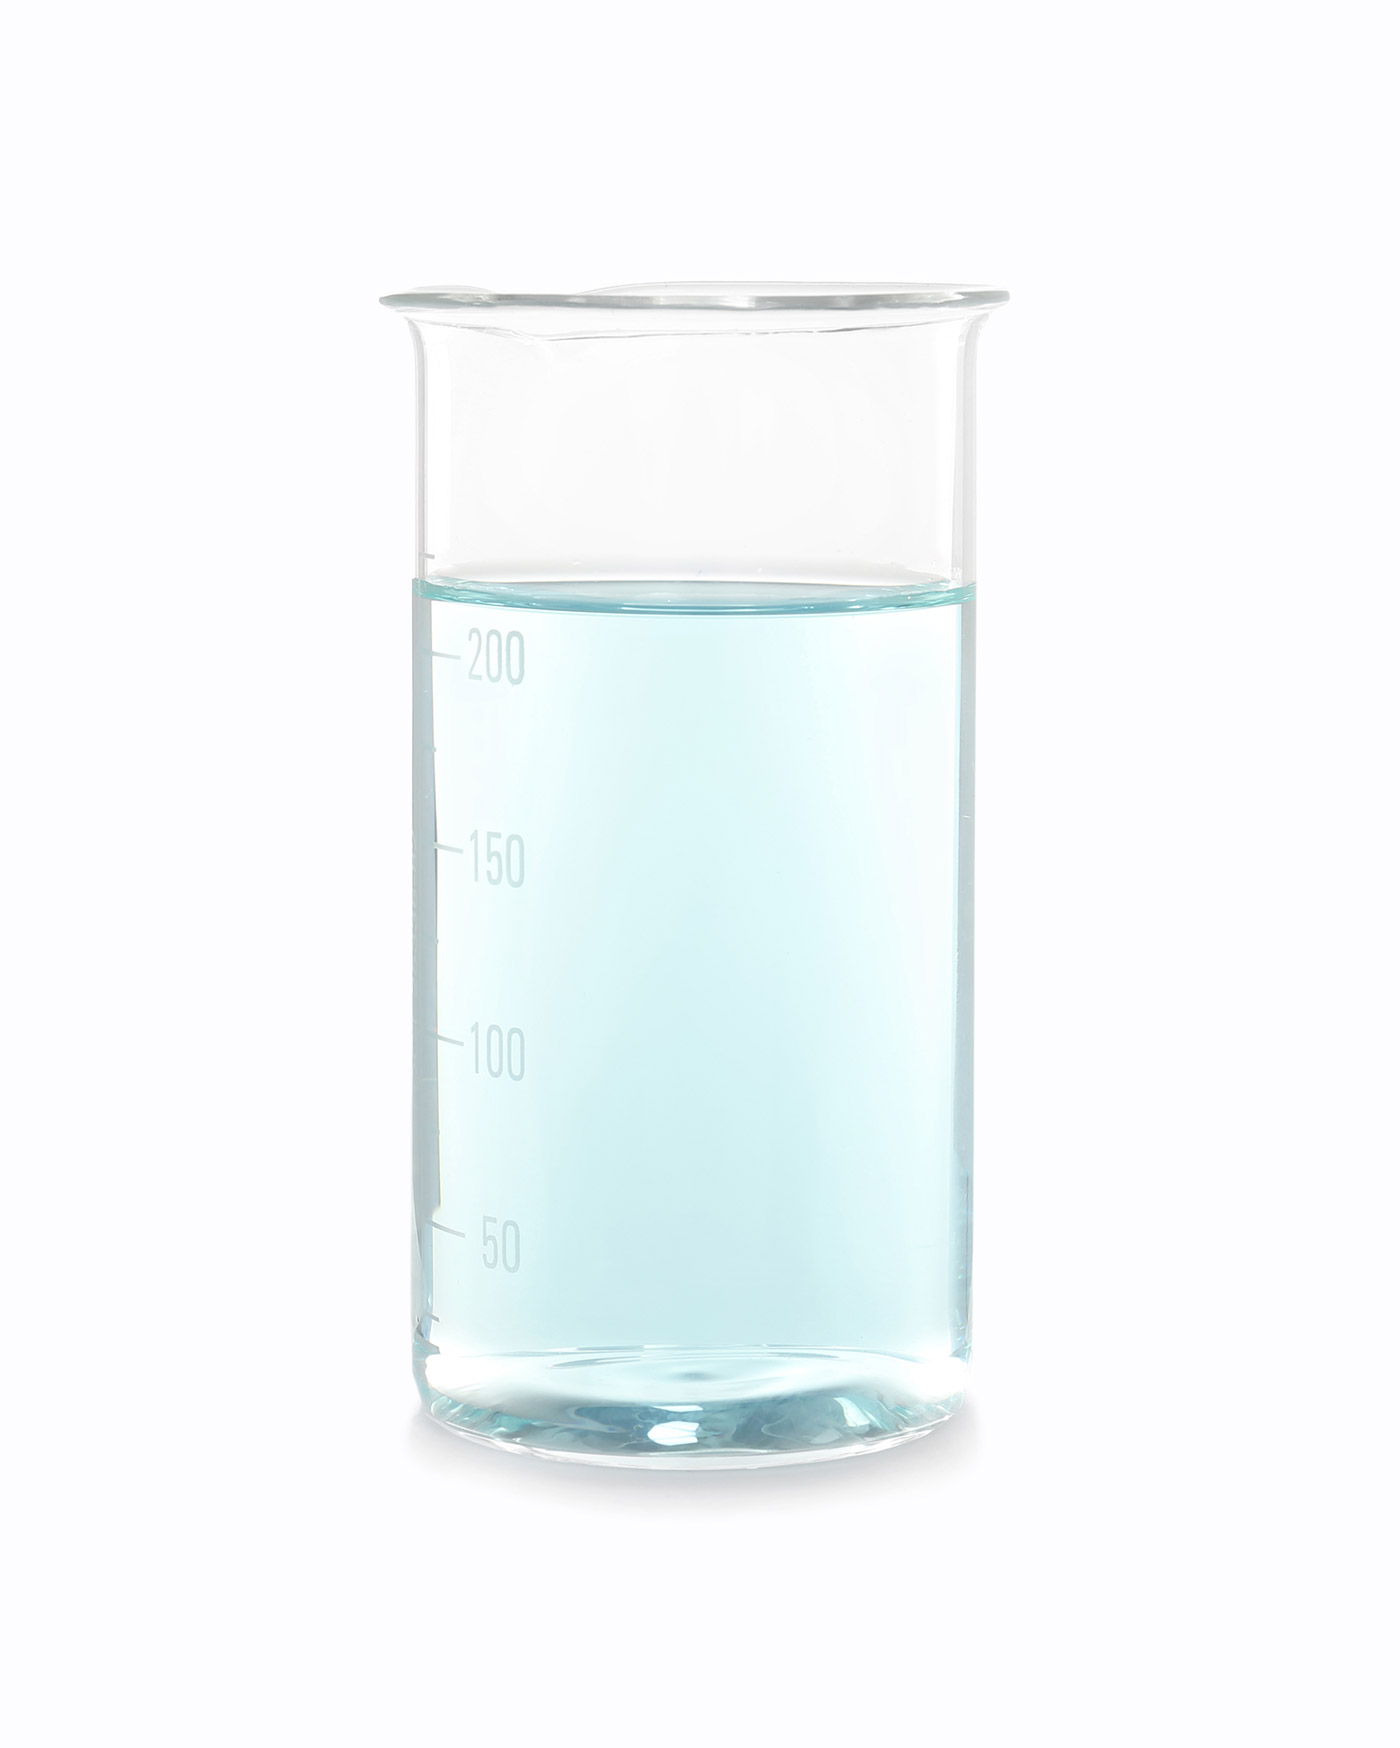 Glass beaker filled with blue liquid to 3 quarters full